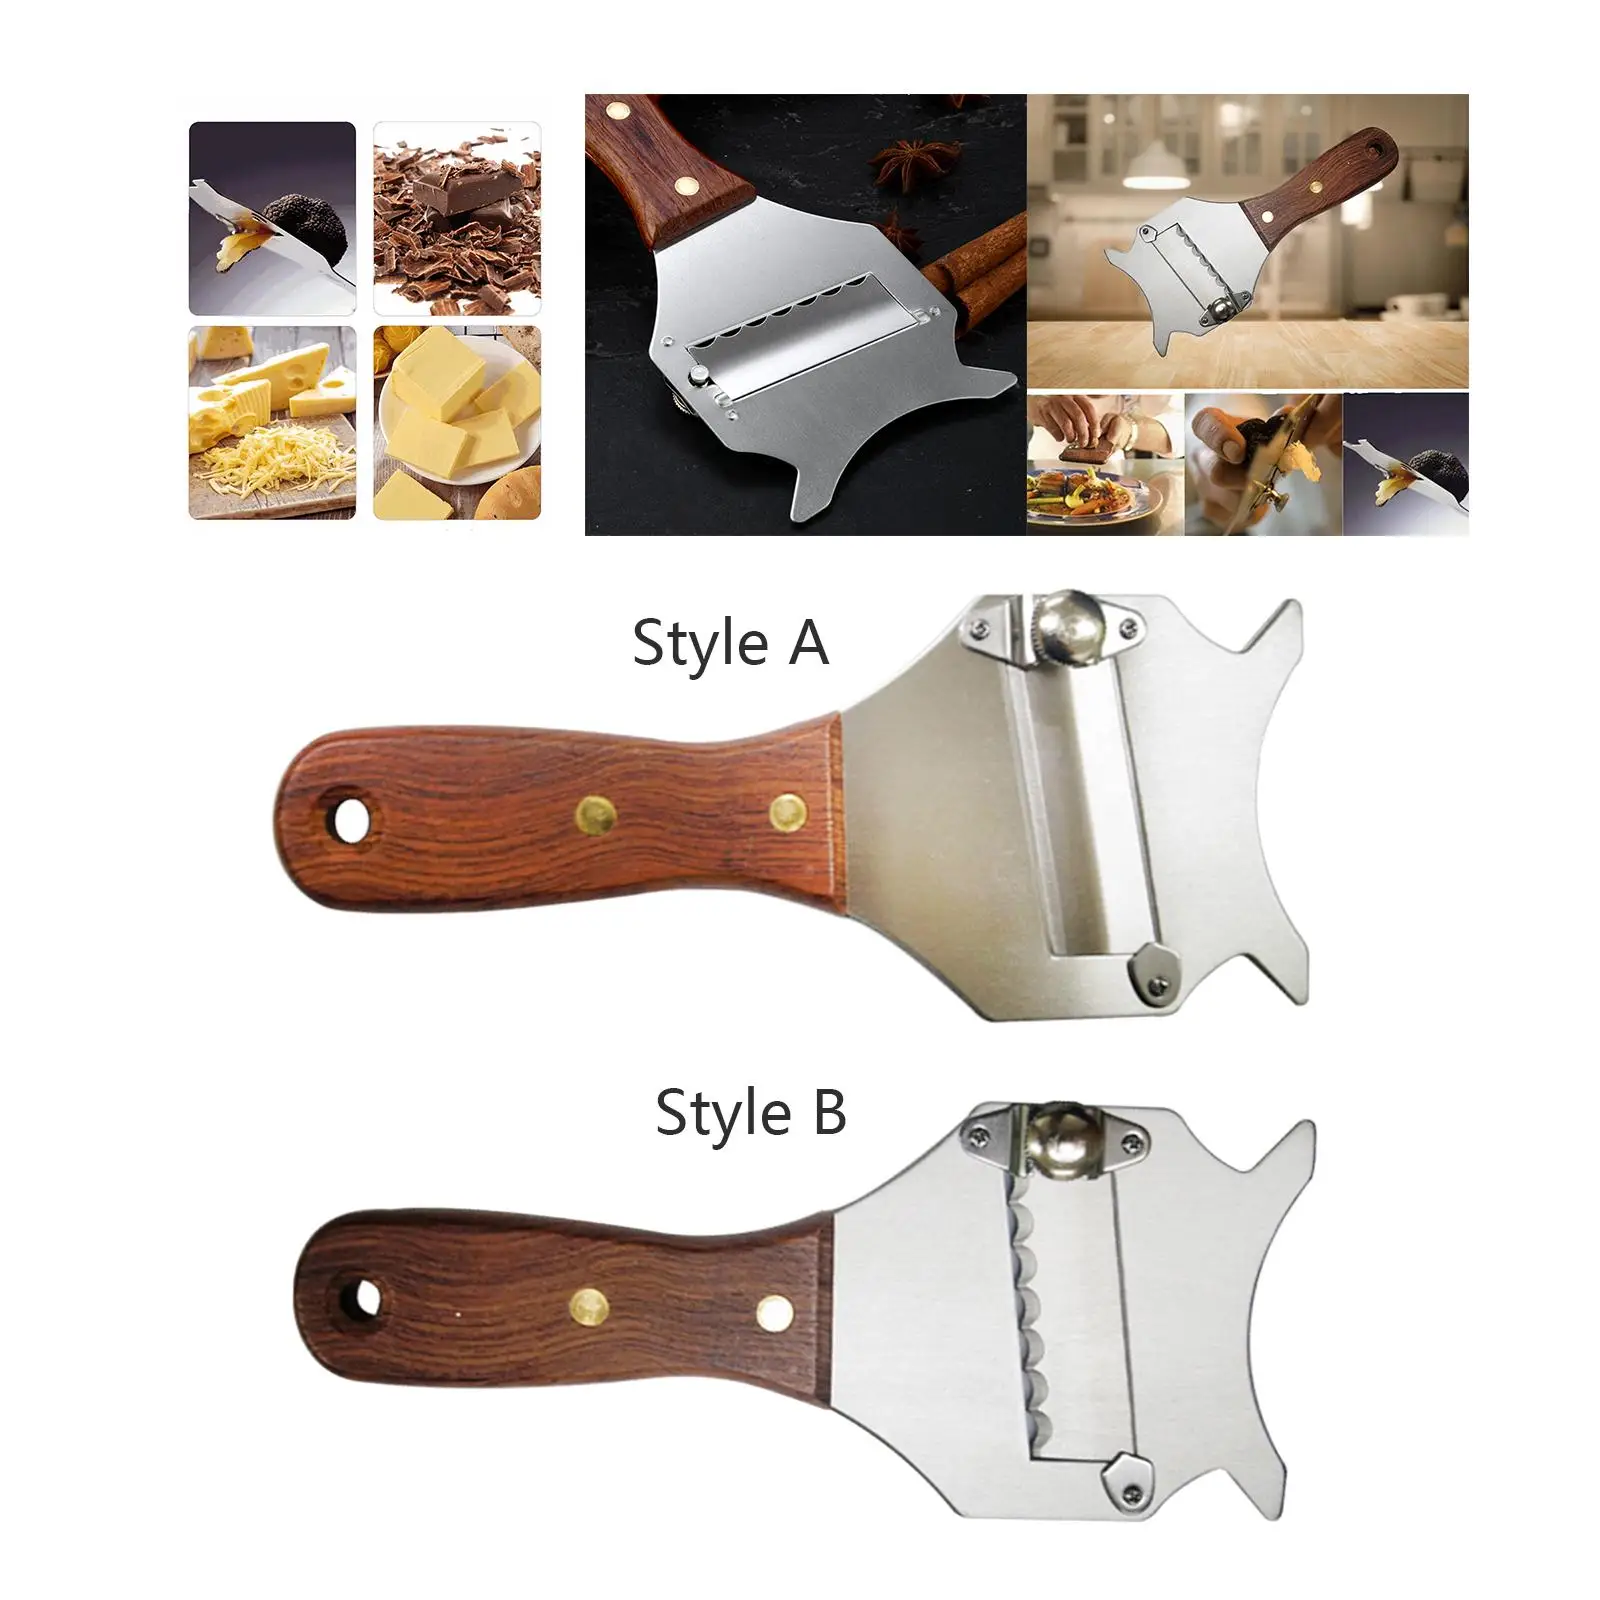 Professional Stainless Steel Truffle Slicer with Wood Handle Utensils Household Cheese Chocolate Slicer Dessert Accessories